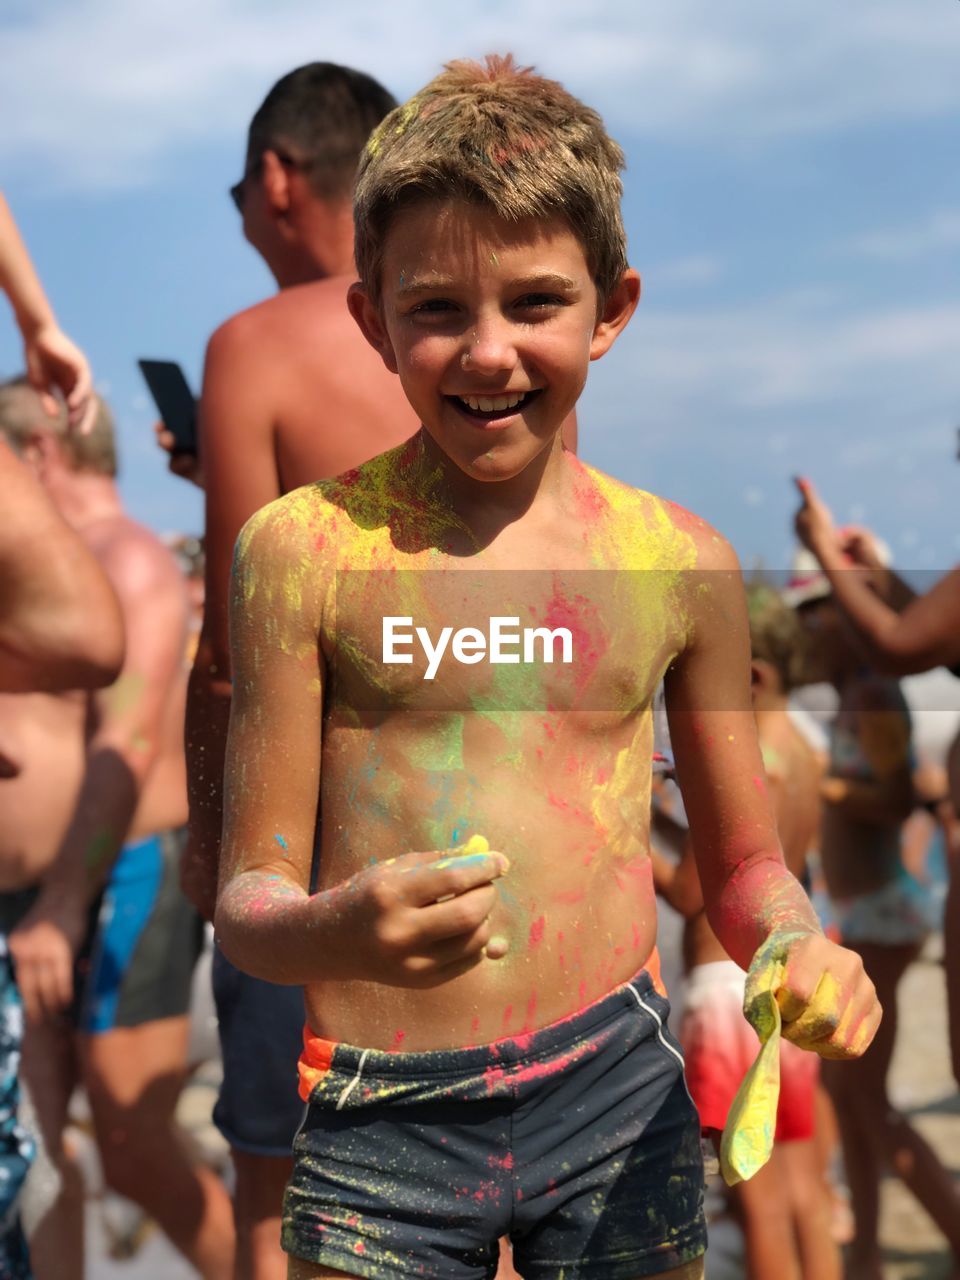 Shirtless boy with powder paint standing outdoors